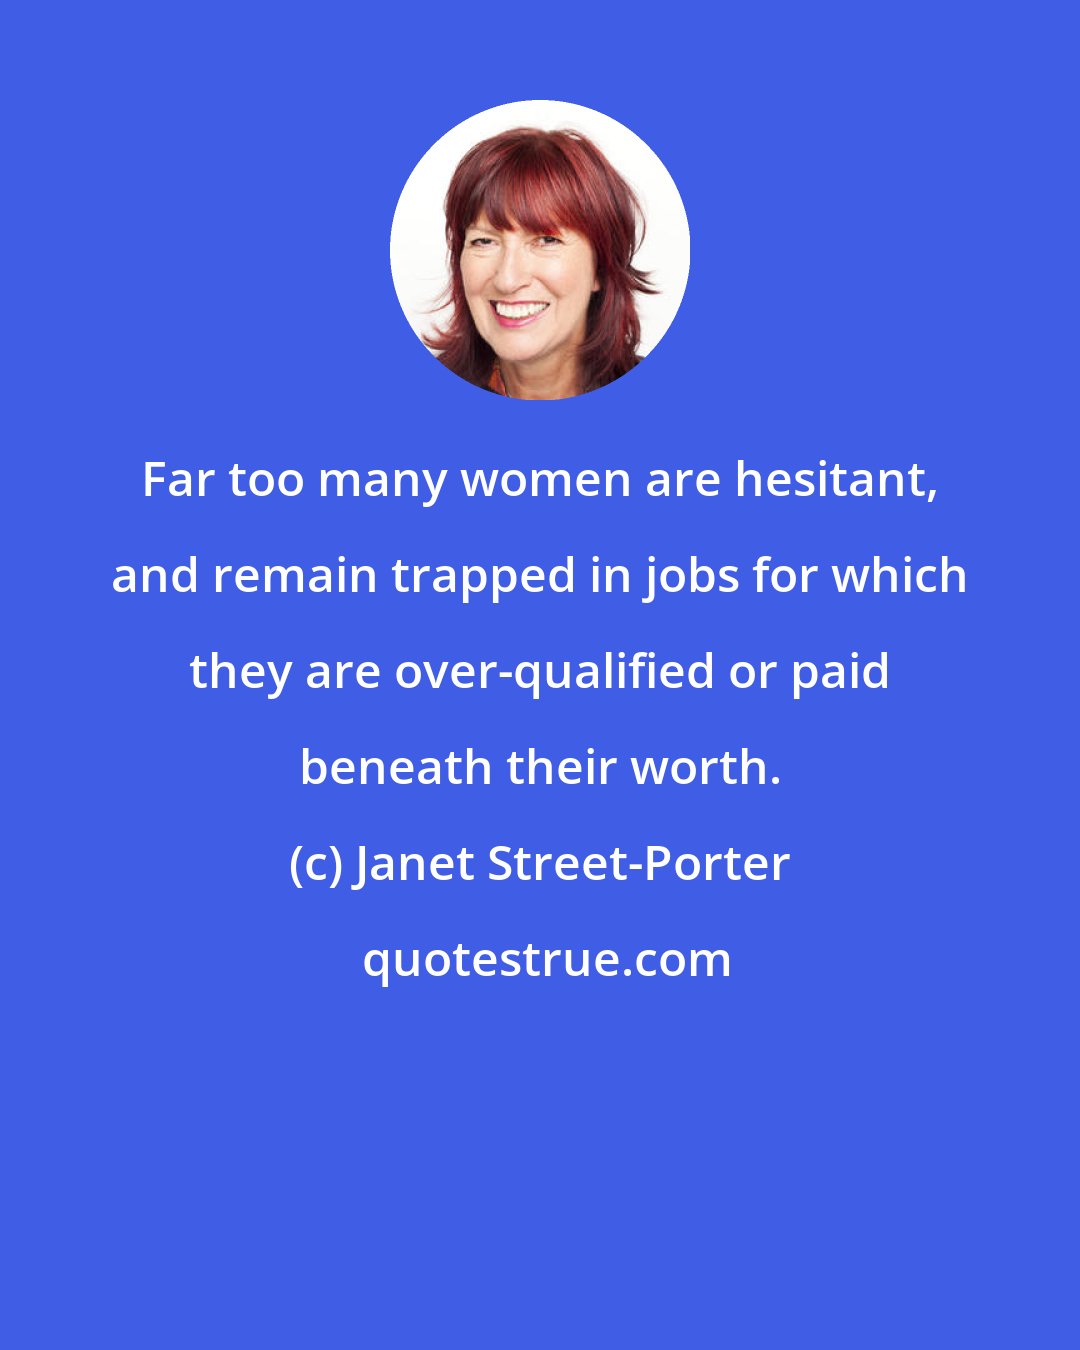 Janet Street-Porter: Far too many women are hesitant, and remain trapped in jobs for which they are over-qualified or paid beneath their worth.